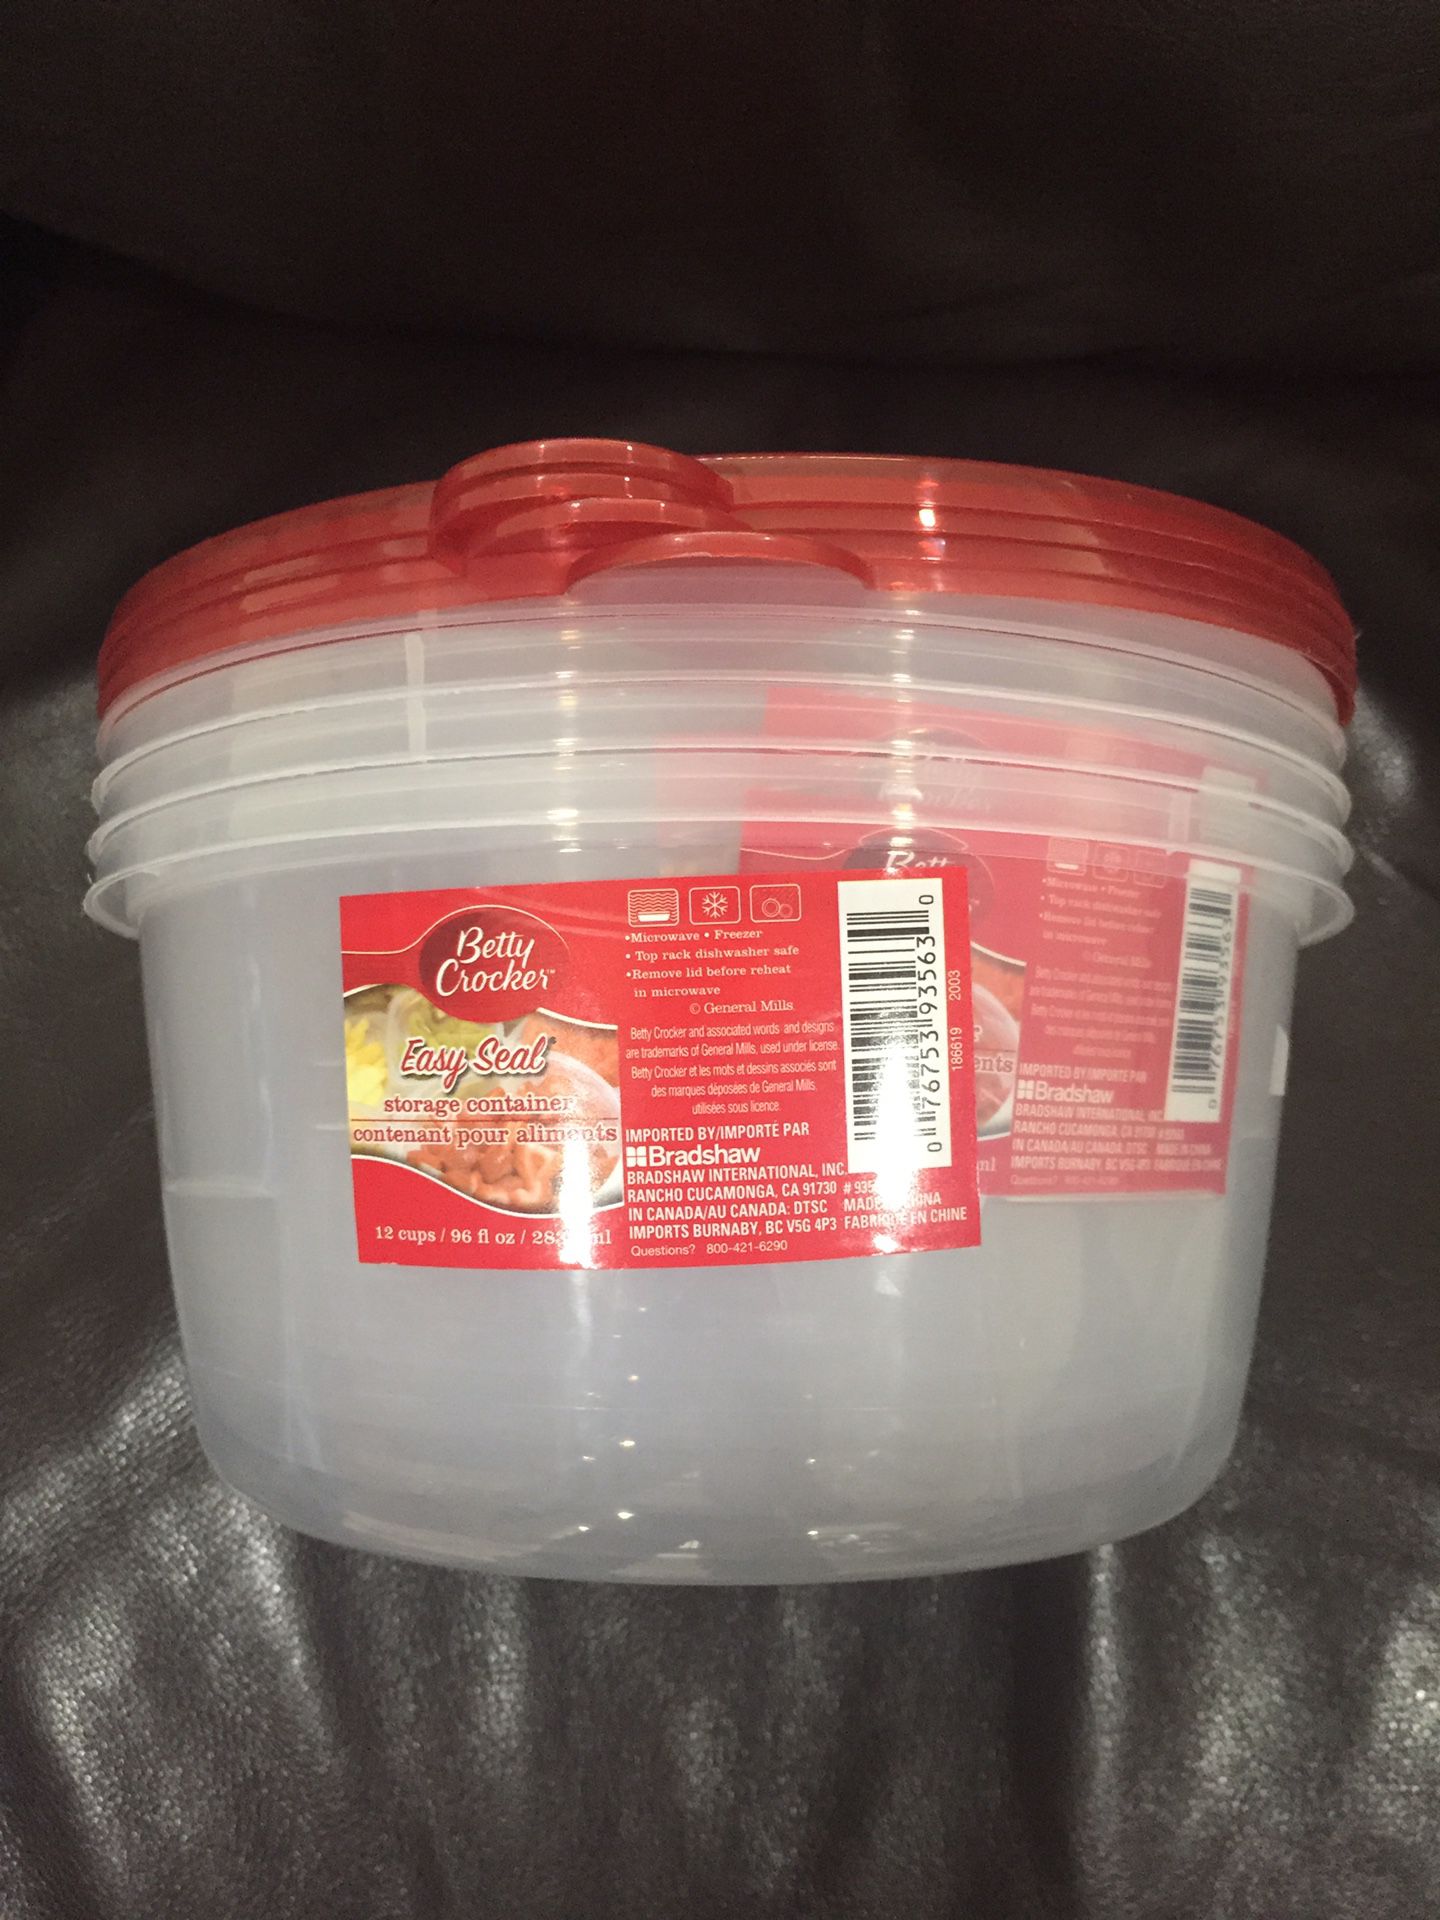 Betty Cocker Storage Container (4 pack)